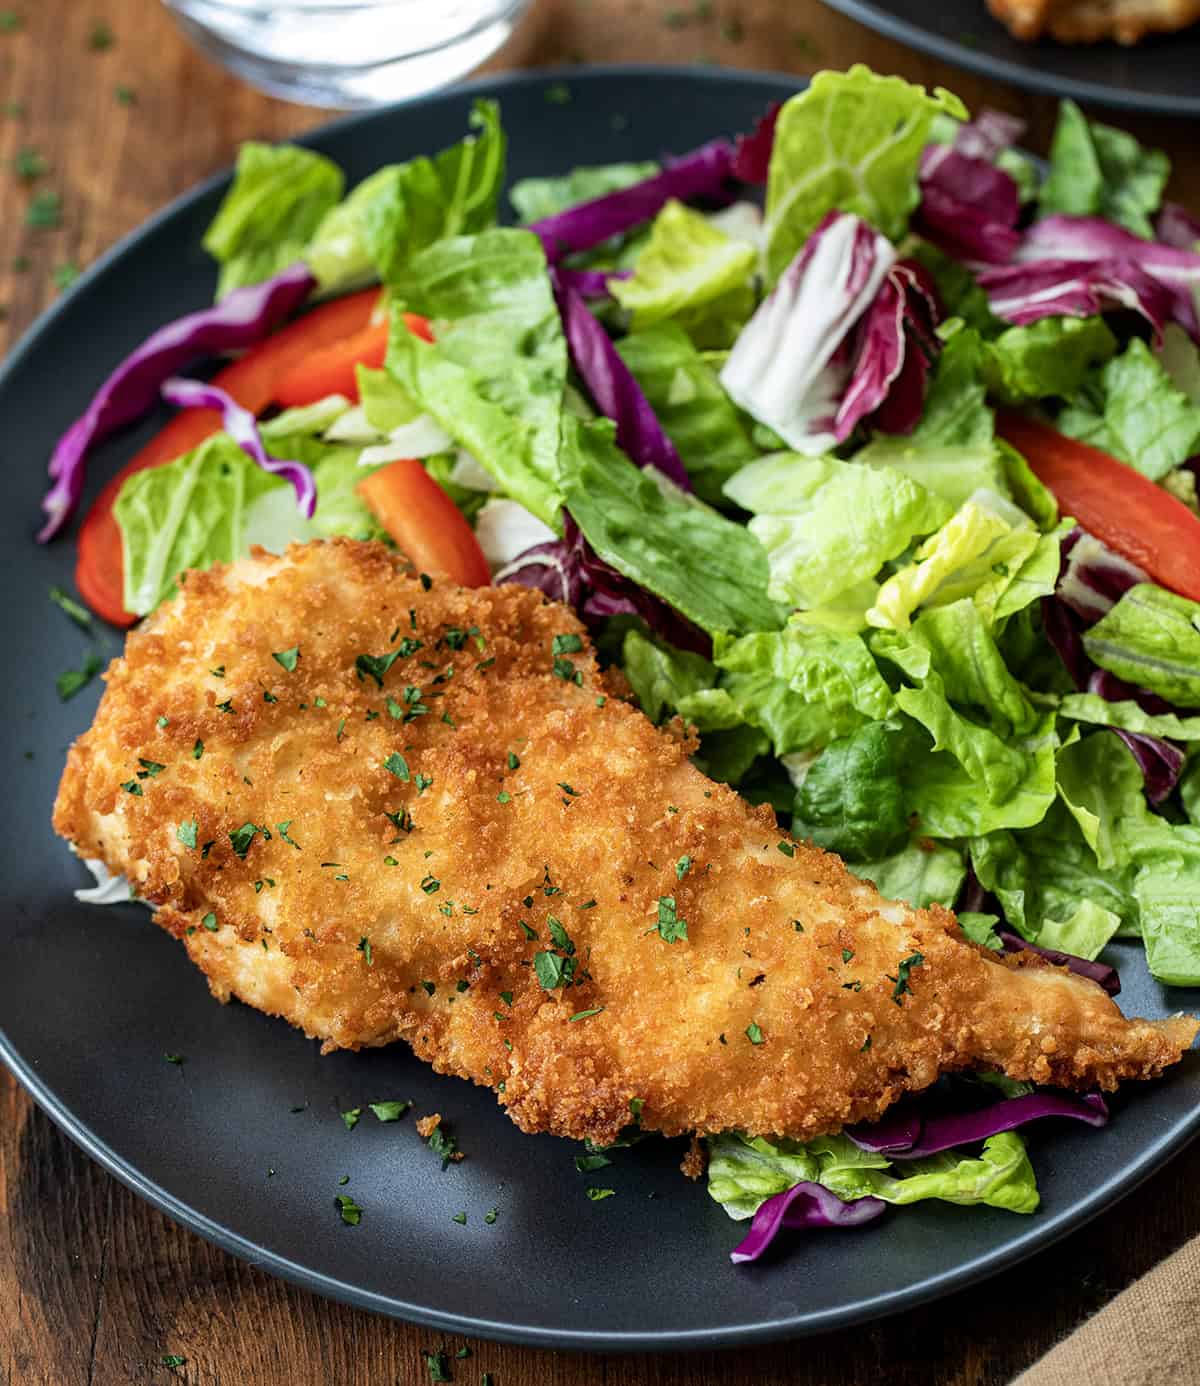 One chicken cutlet on a black plate with salad on a wooden table.